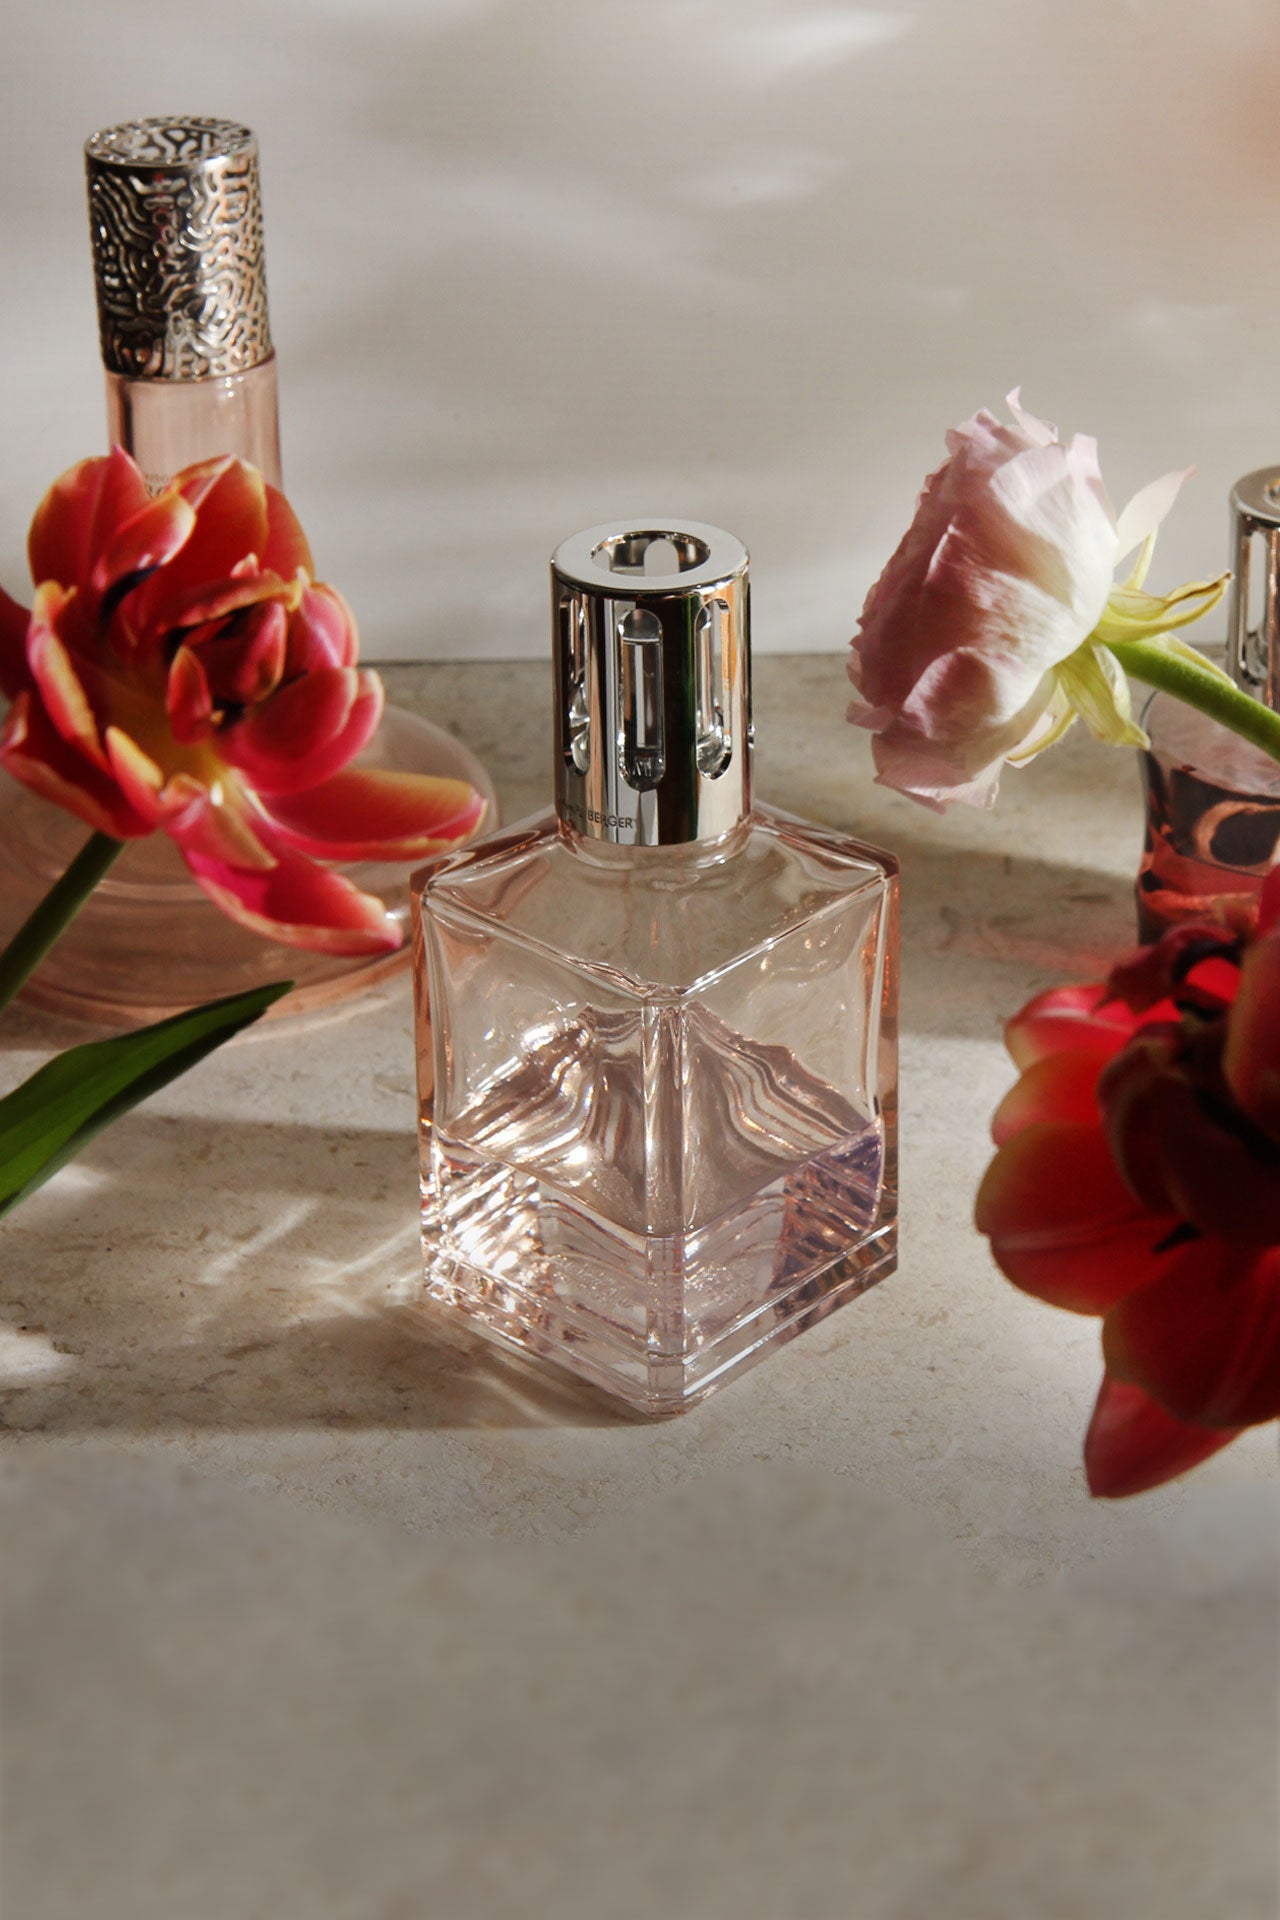 Lampe Berger 500ml fragrance – On The Common